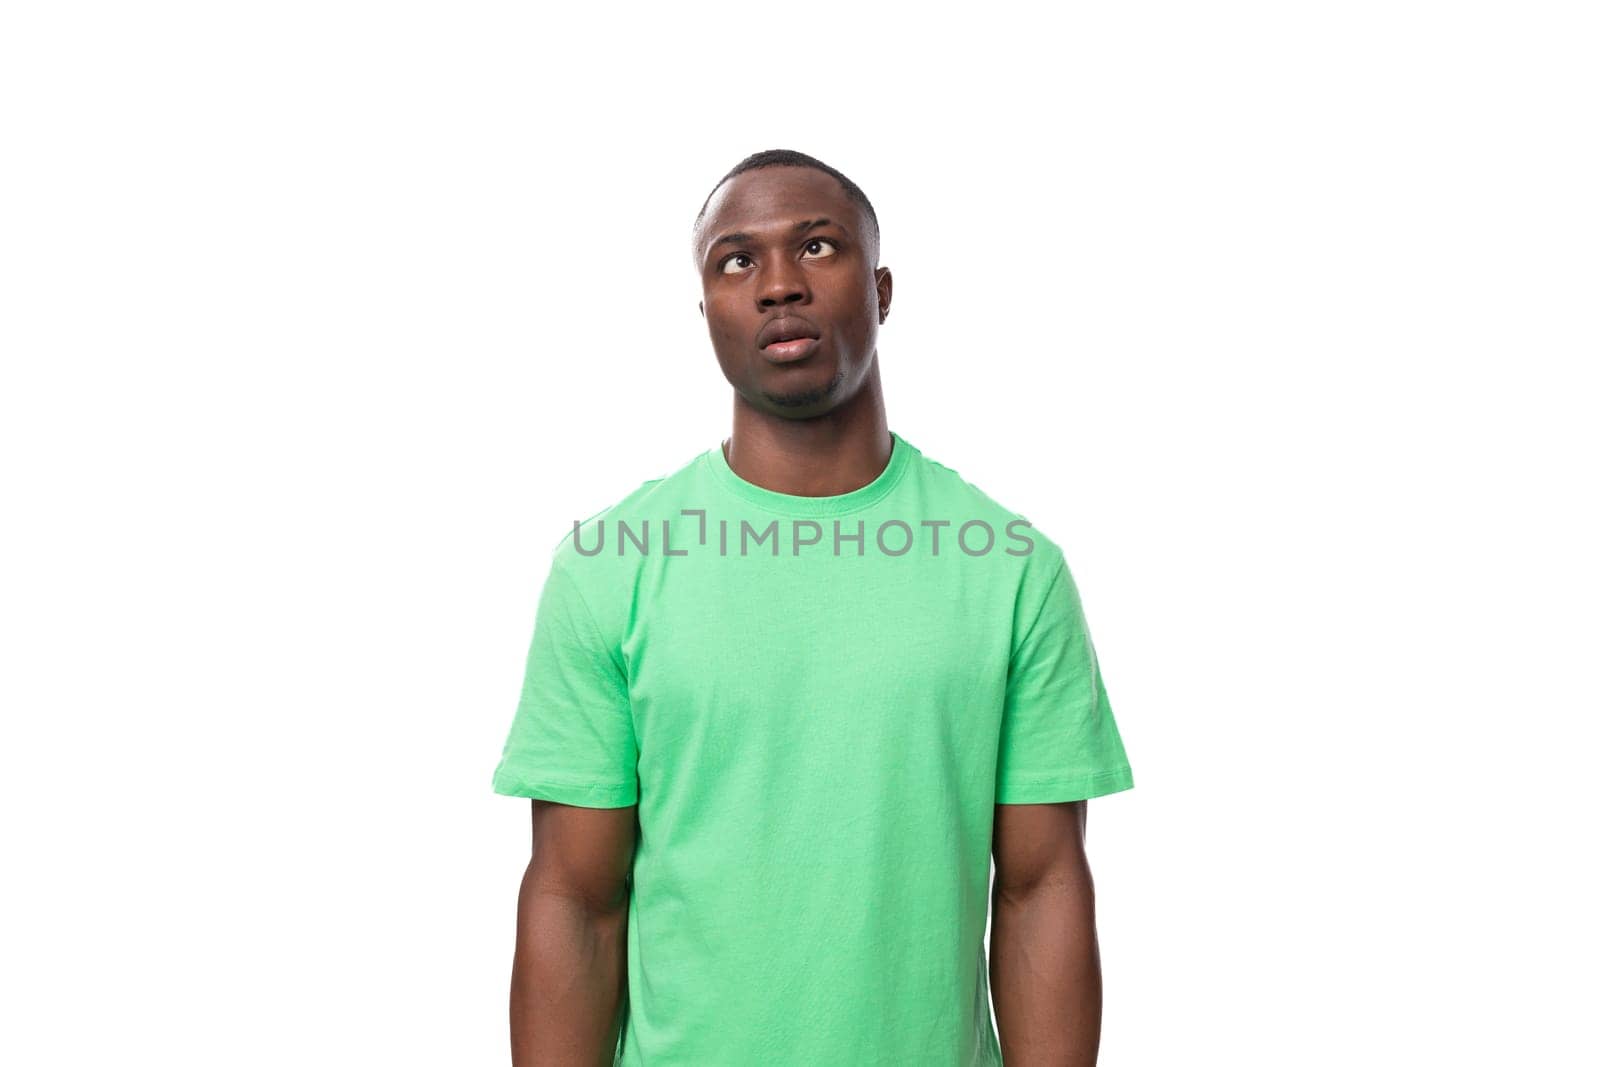 A 30-year-old smart African man dressed in a light green T-shirt is trying to remember a thought by TRMK